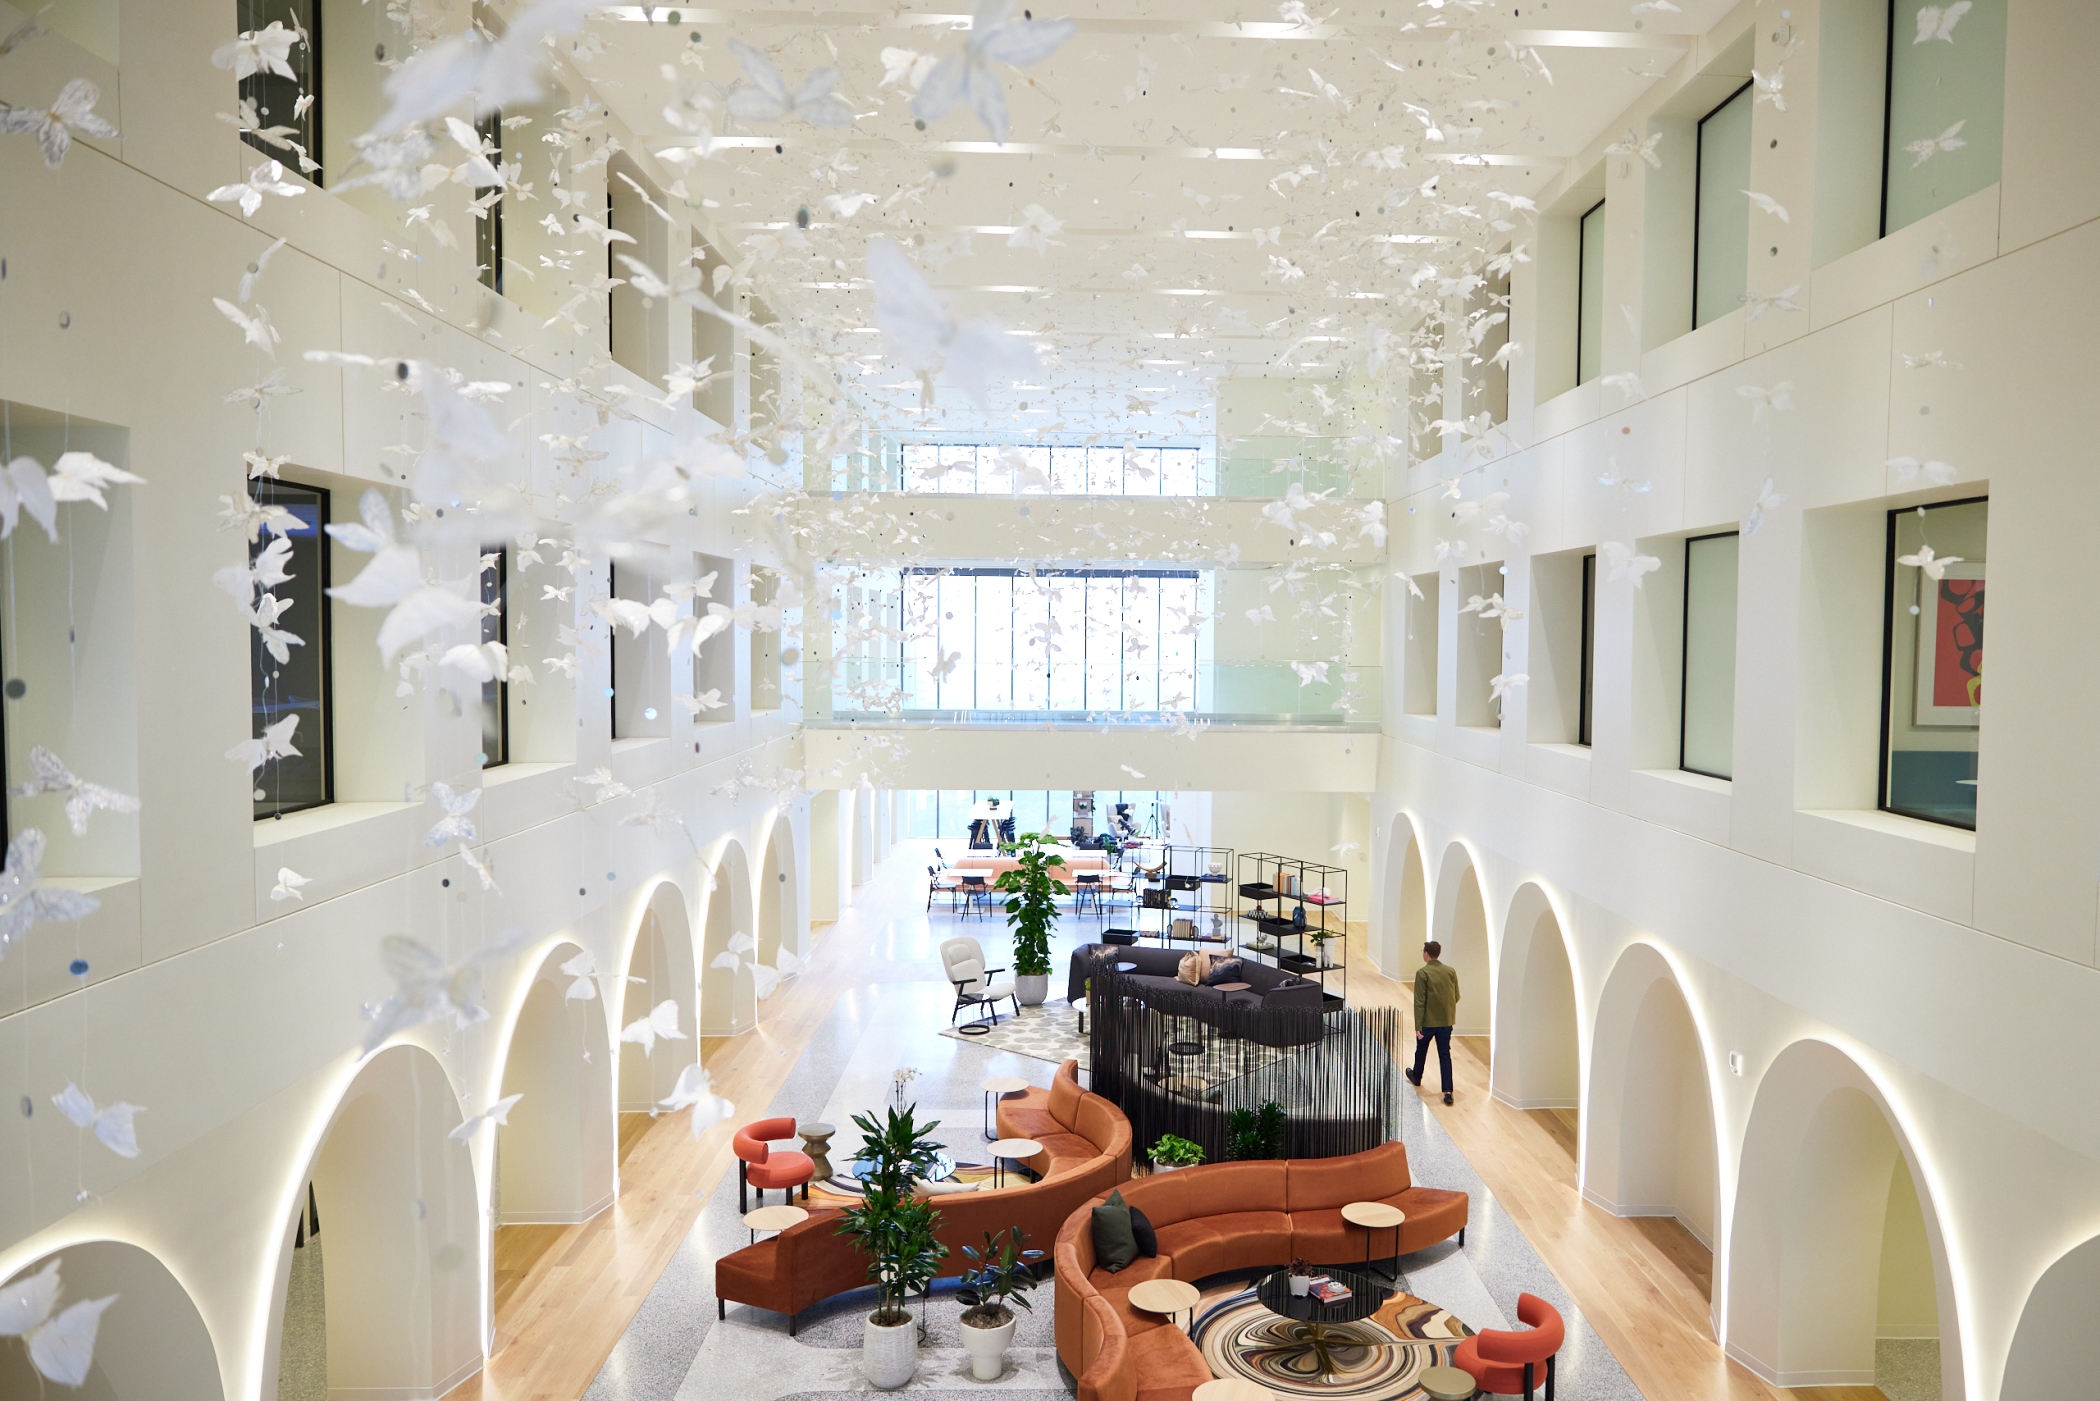 Neiman Marcus has a three-story atrium at its new Dallas headquarters and hub office. (Neiman Marcus)